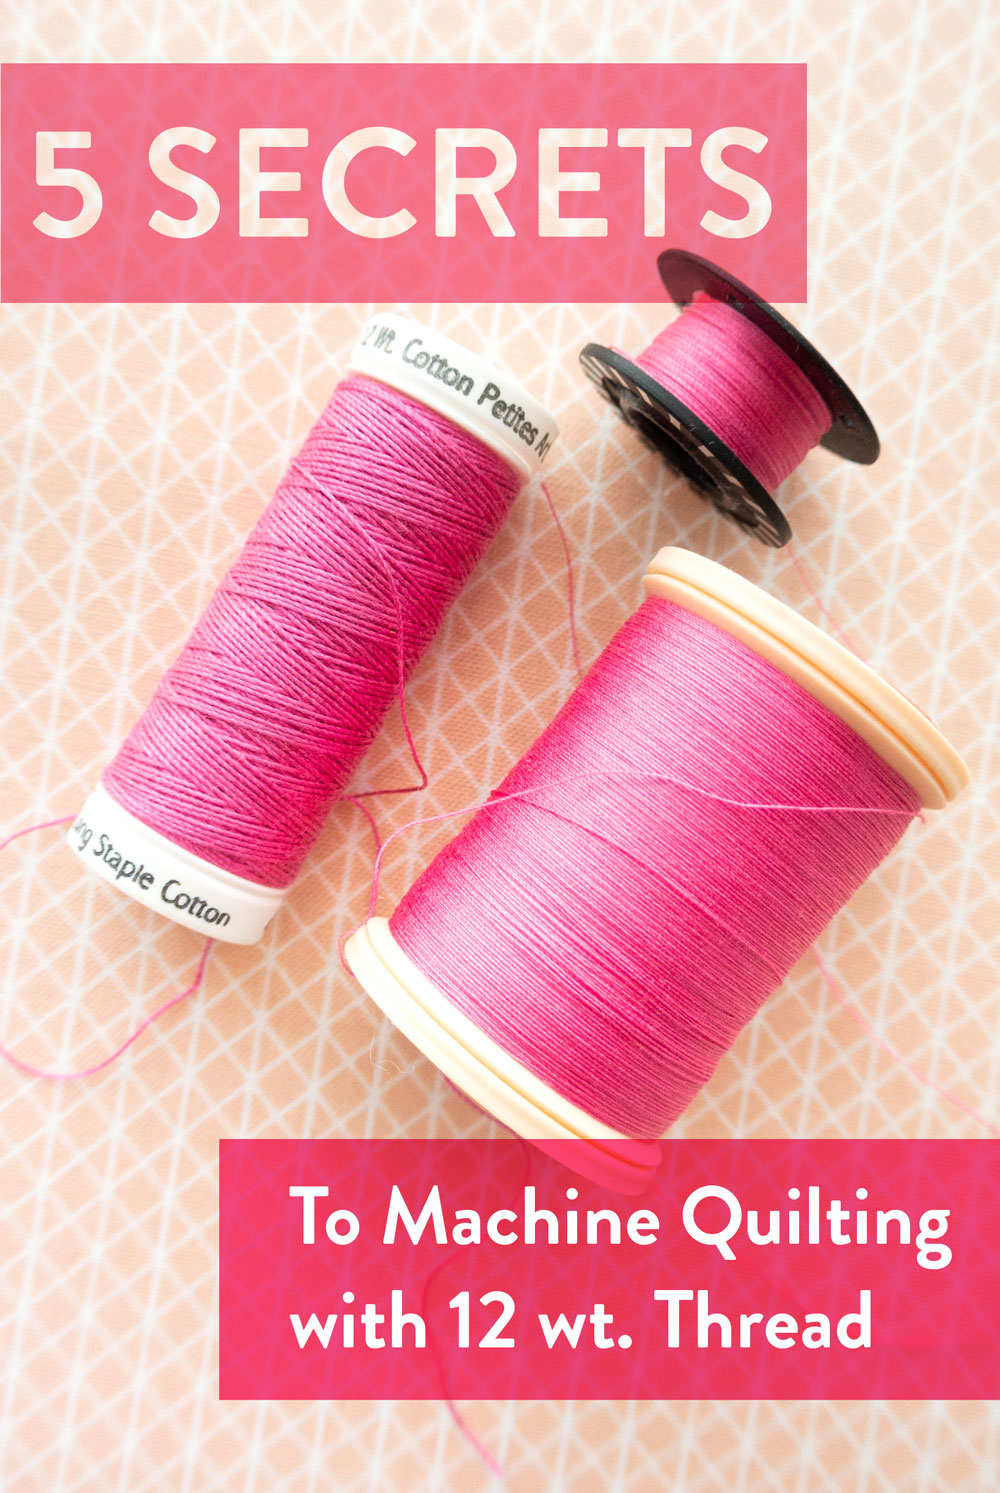 Machine quilting with 12 wt. thread is not hard, but you do need to know a few things. Here are 5 secrets to machine quilting with 12 weight thread!